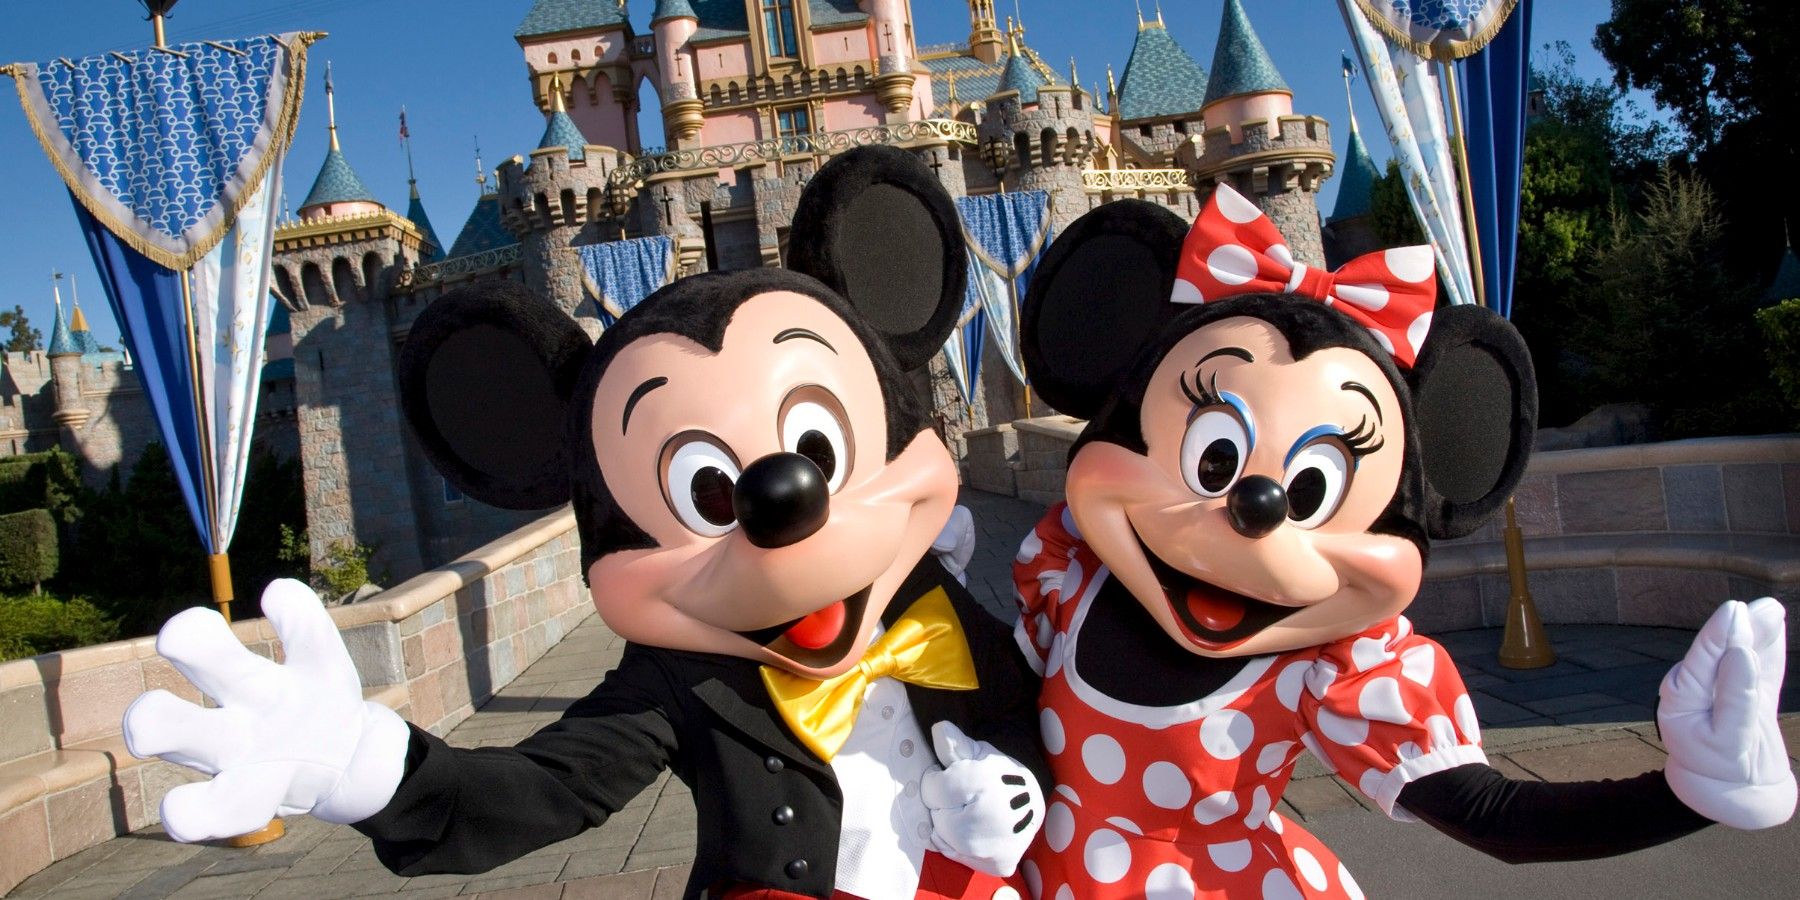 Mickey and Minnie Mouse at Disney World